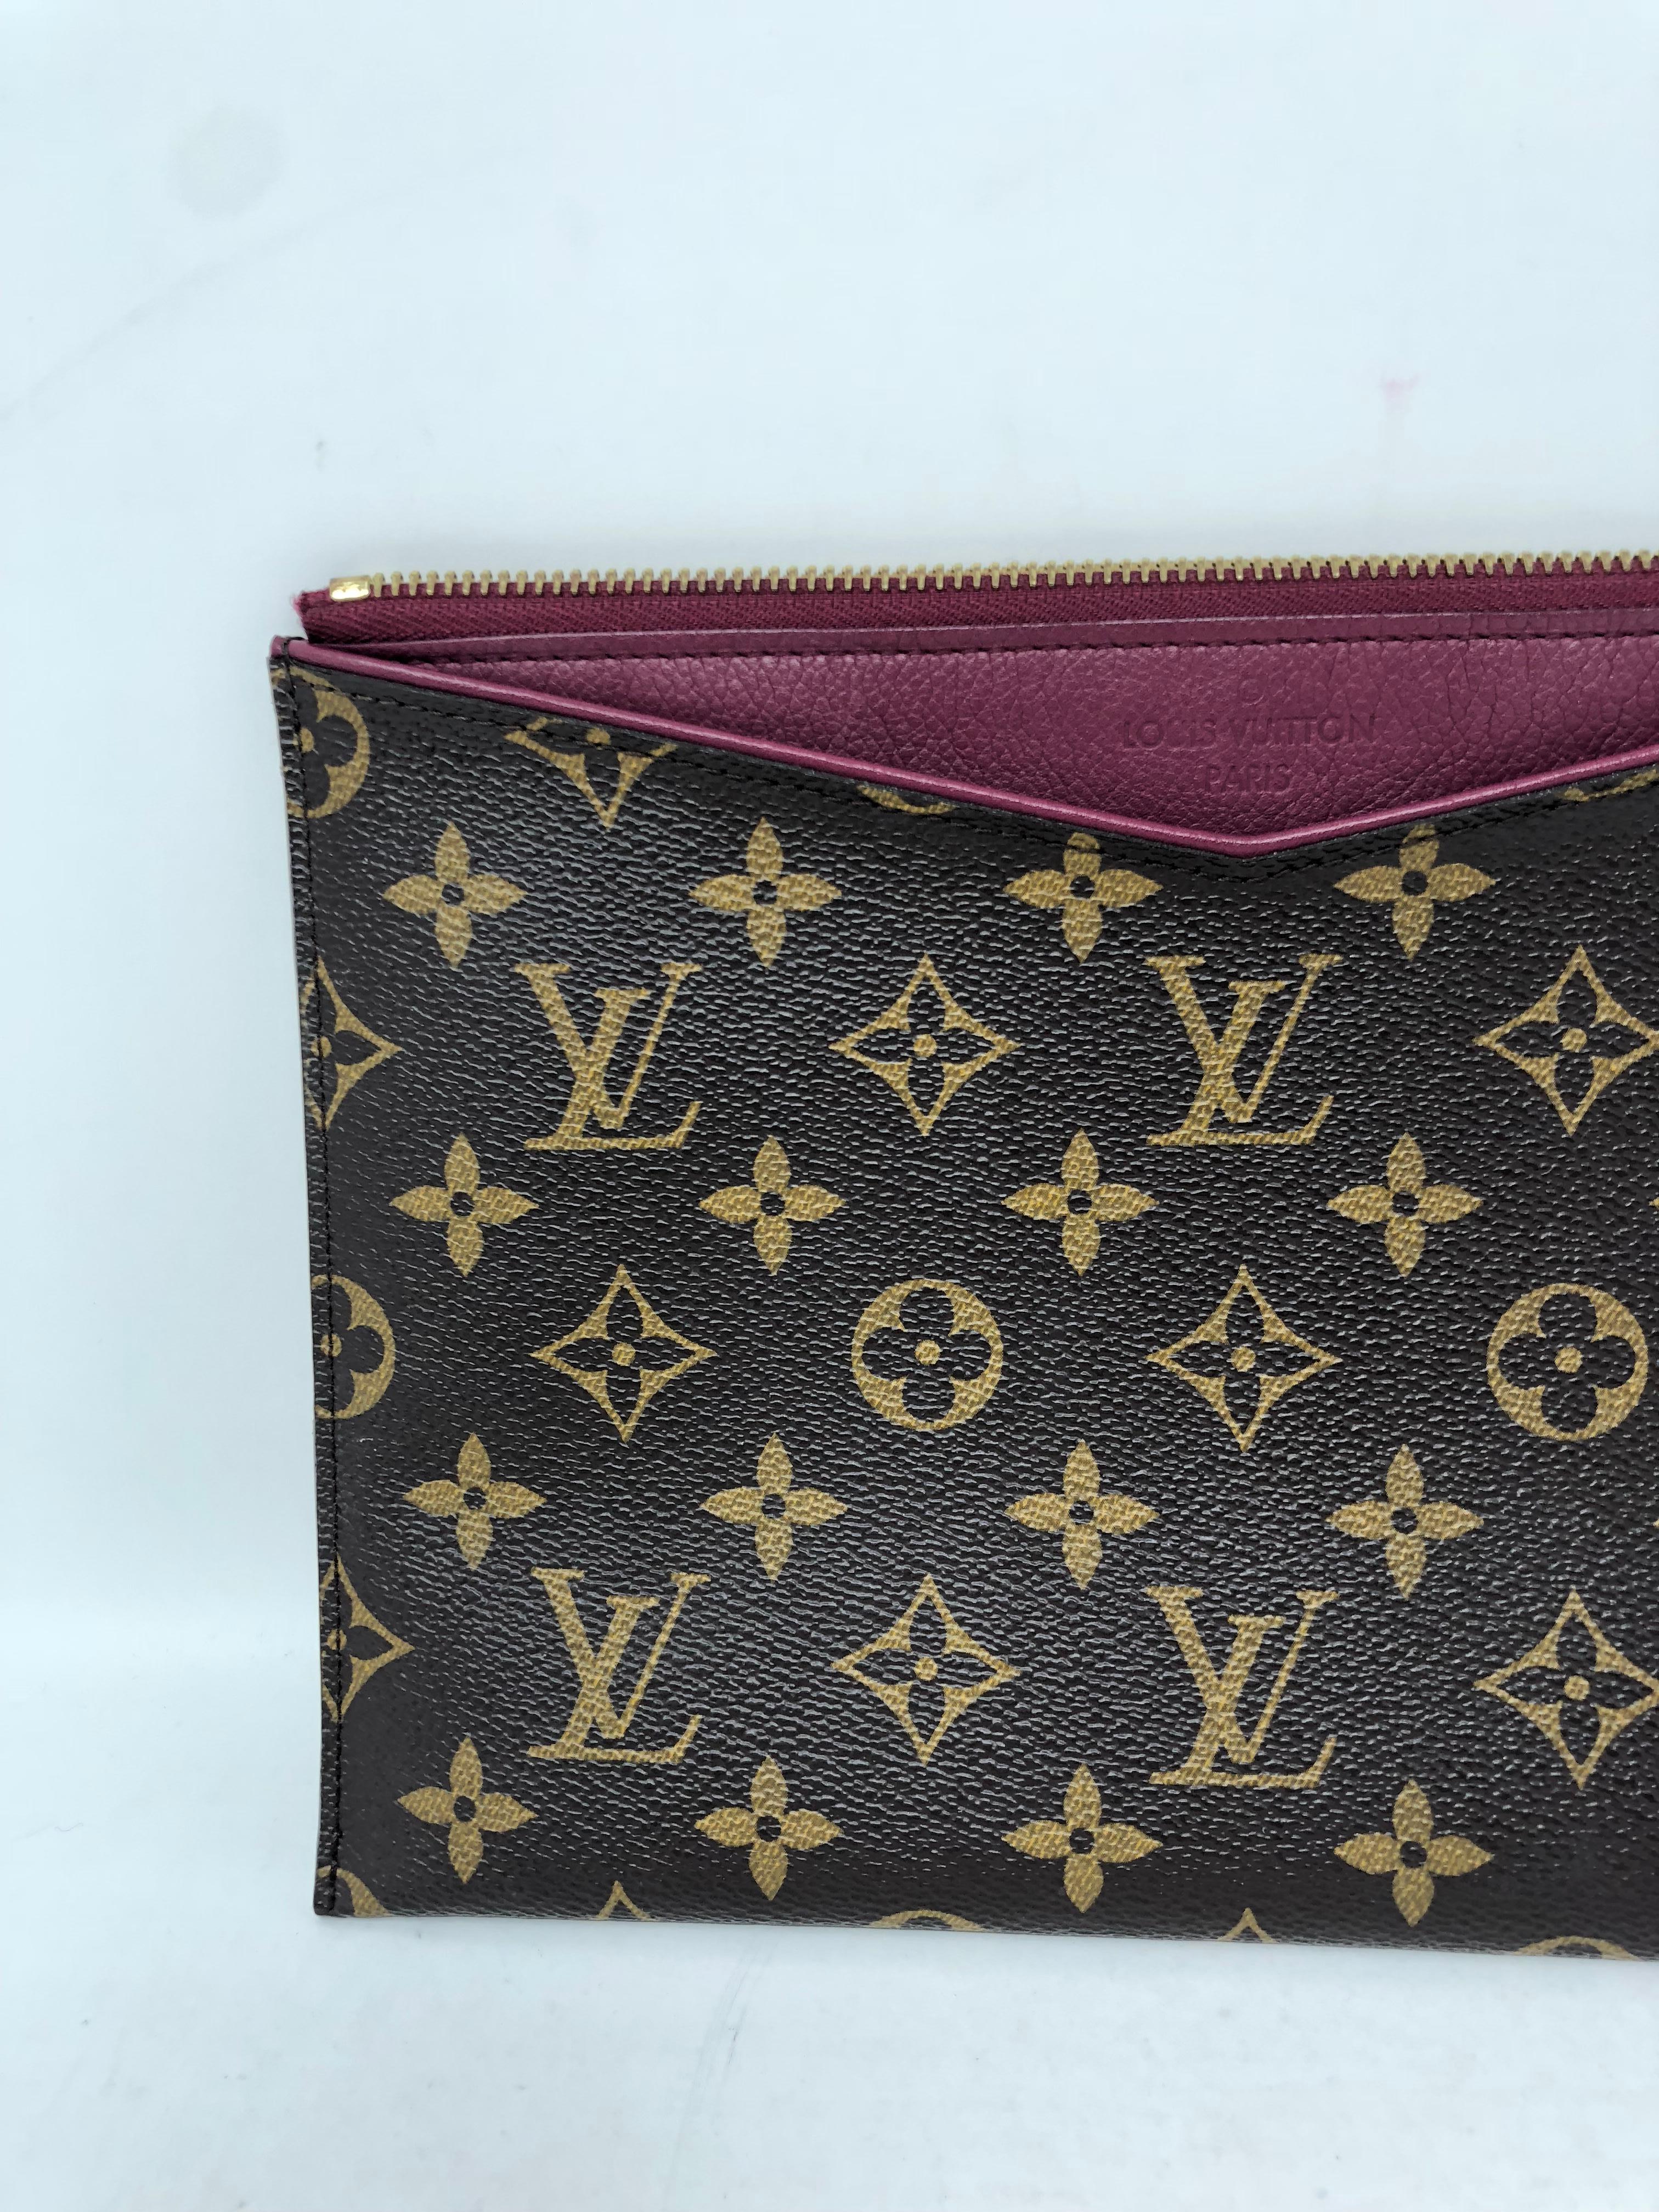 Louis Vuitton Pallas Clutch with purple interior. Retired item from LV. No longer available at Louis. It is a rare style that can be worn as a wristlet or a clutch. Monogram and leather interior with wallet inserts inside the clutch. Guaranteed